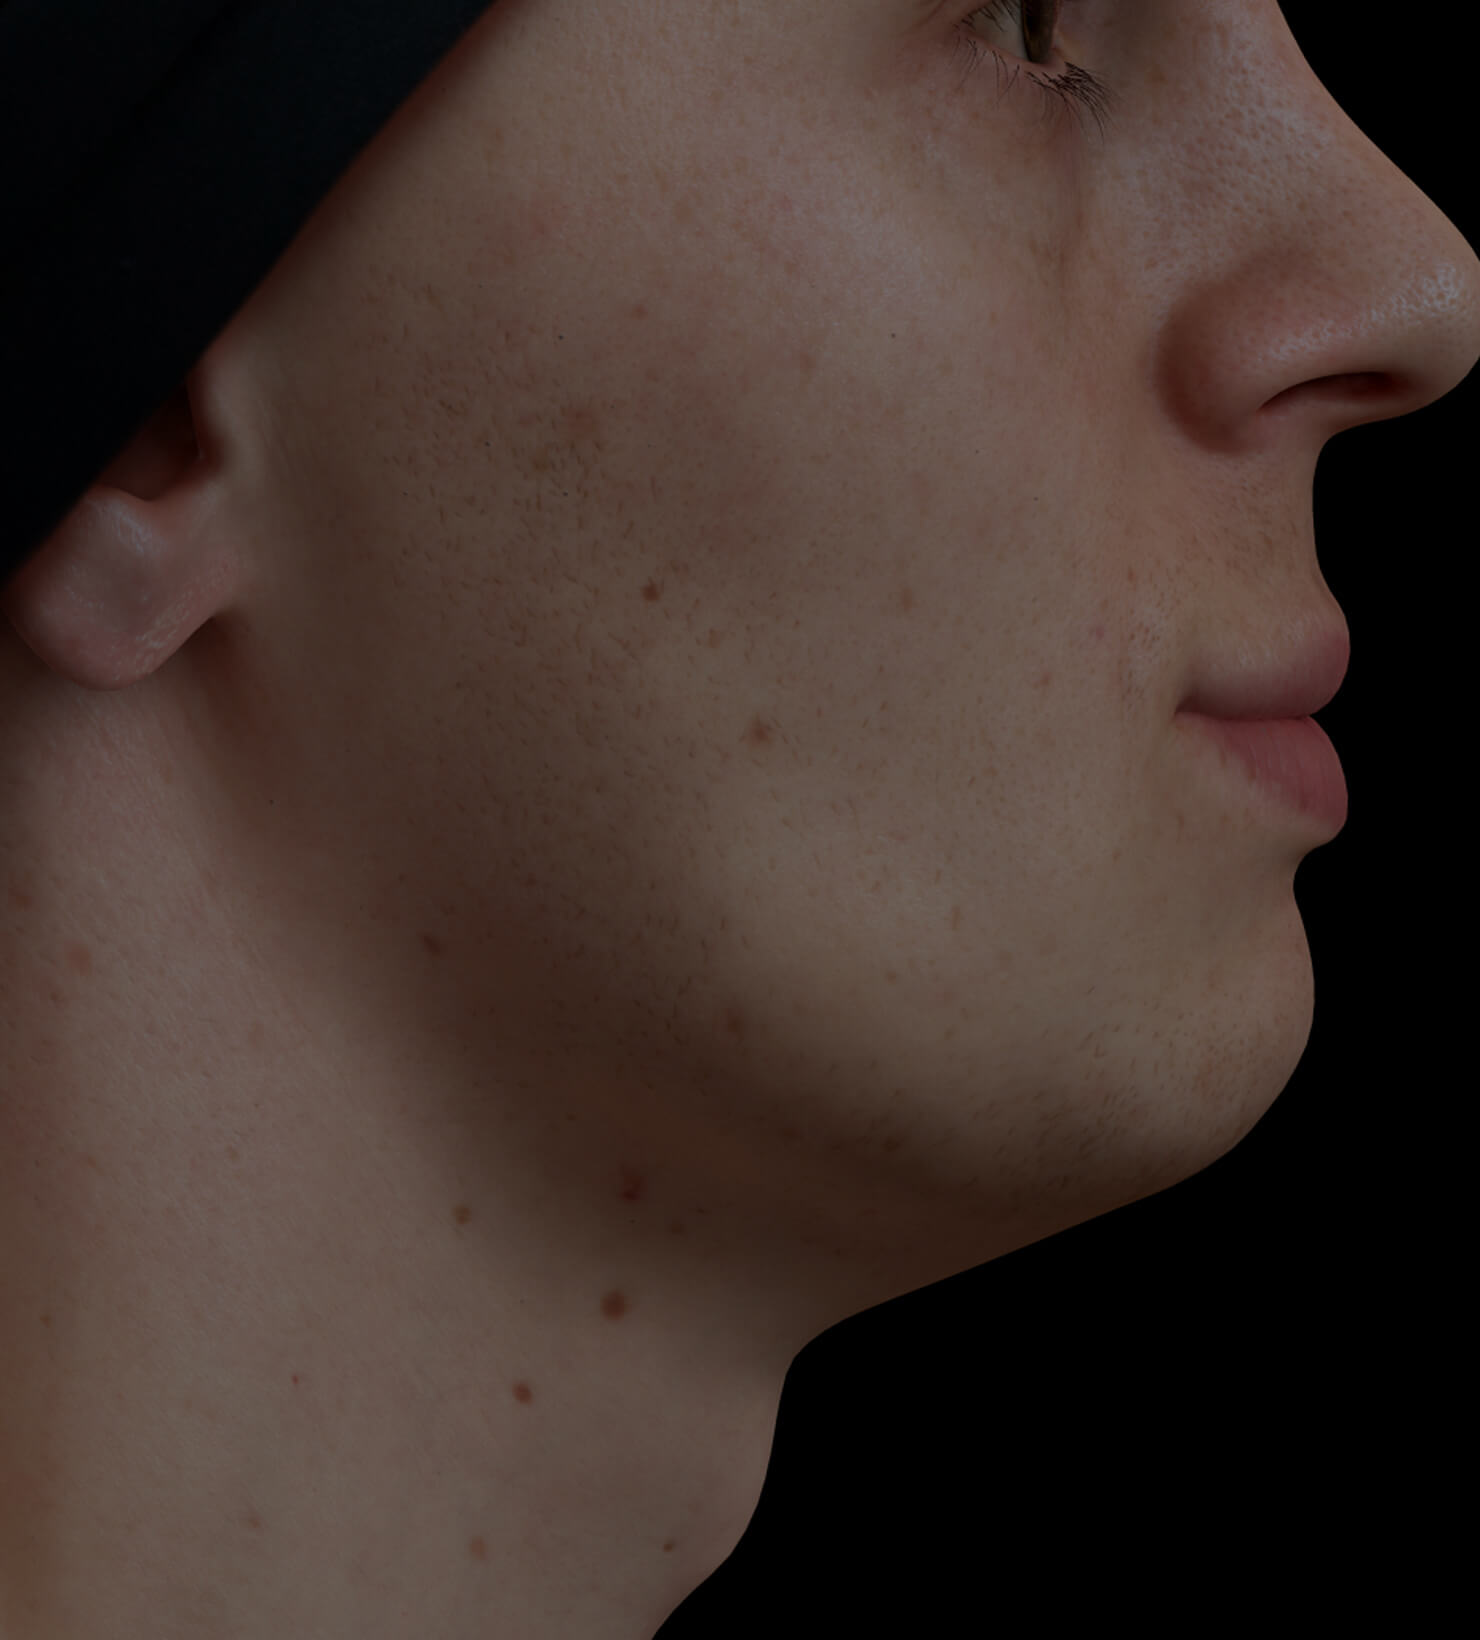 Clinique Chloé male patient with poor jawline definition treated with Radiesse injections for a more defined jawline